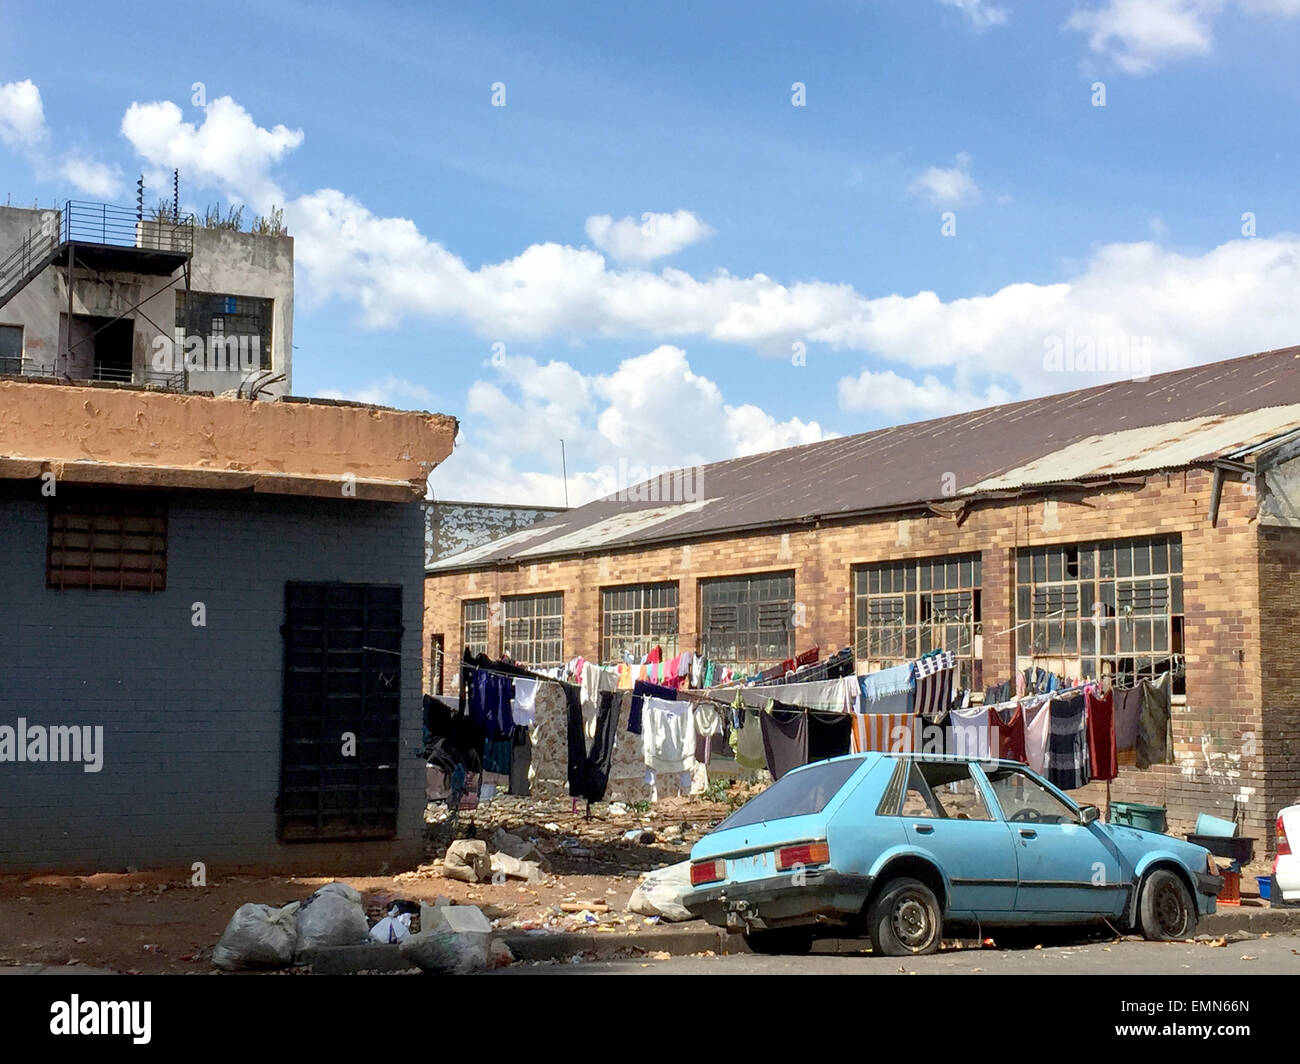 Johannesburg, South Africa. 21st Apr, 2015. Laundry hangs in the back courtyard of the Jeppestown workers' home in the center of Johannesburg, South Africa, 21 April 2015. The 1,500-resident home, originally founded for mine workers, was one of the starting points for the xenophobic riots of the past weeks. Dozens of immigrant-owned shops were looted. Photo: JUERGEN BAETZ/dpa/Alamy Live News Stock Photo